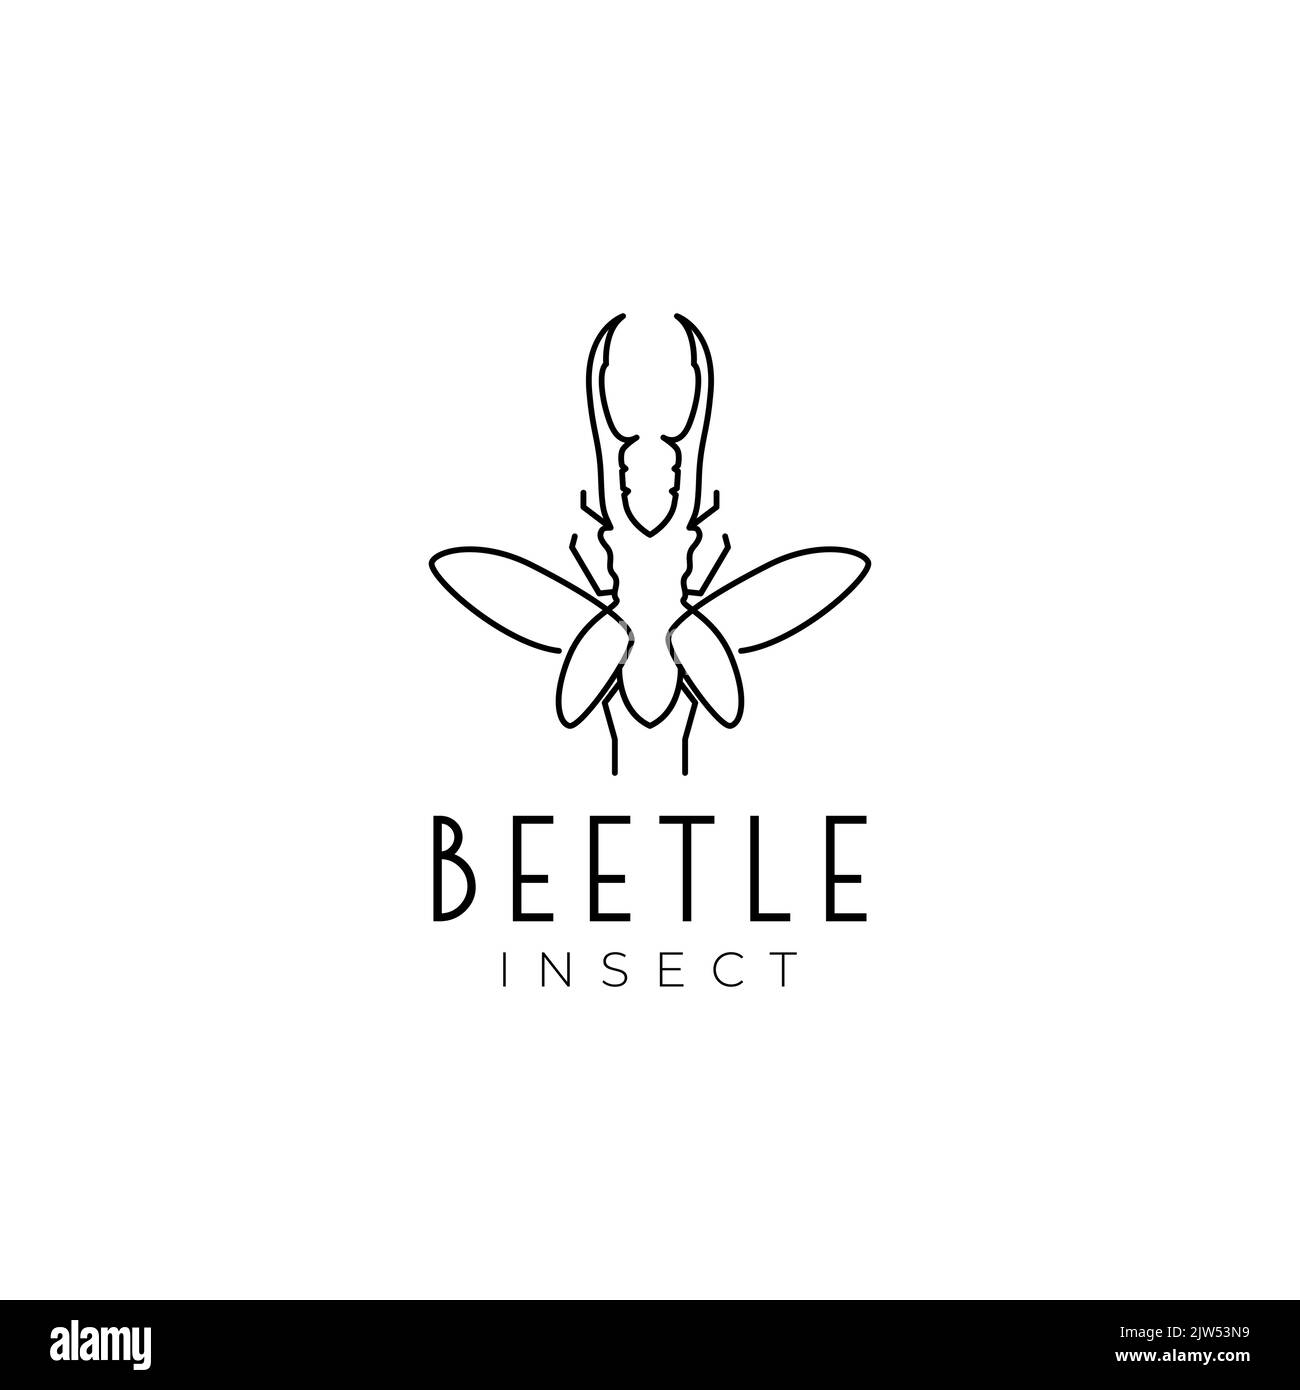 insect male beetle logo design Stock Vector